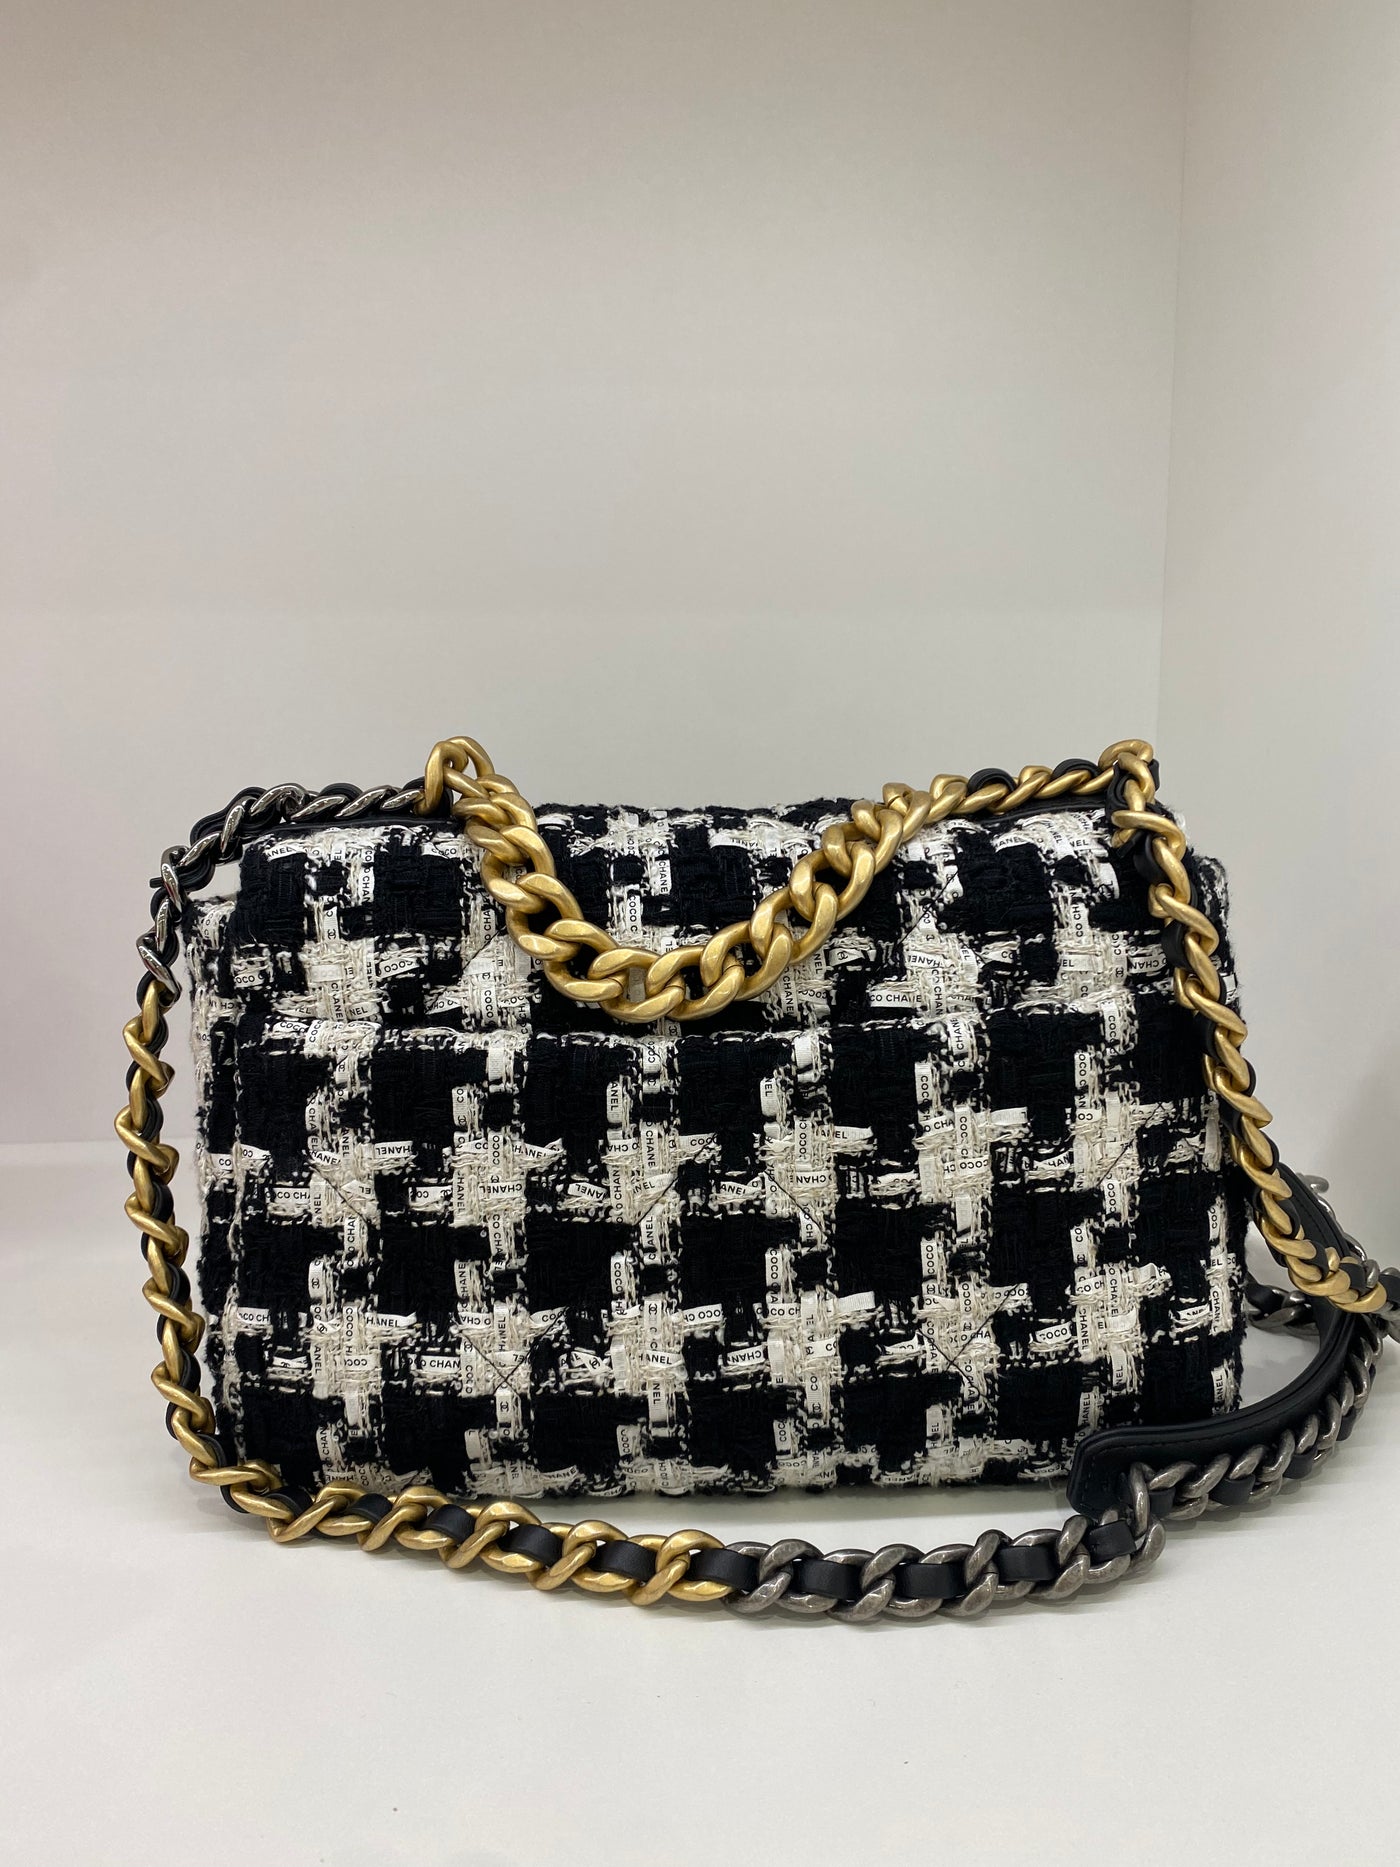 Chanel 19 bag small - Tweed houndstooth